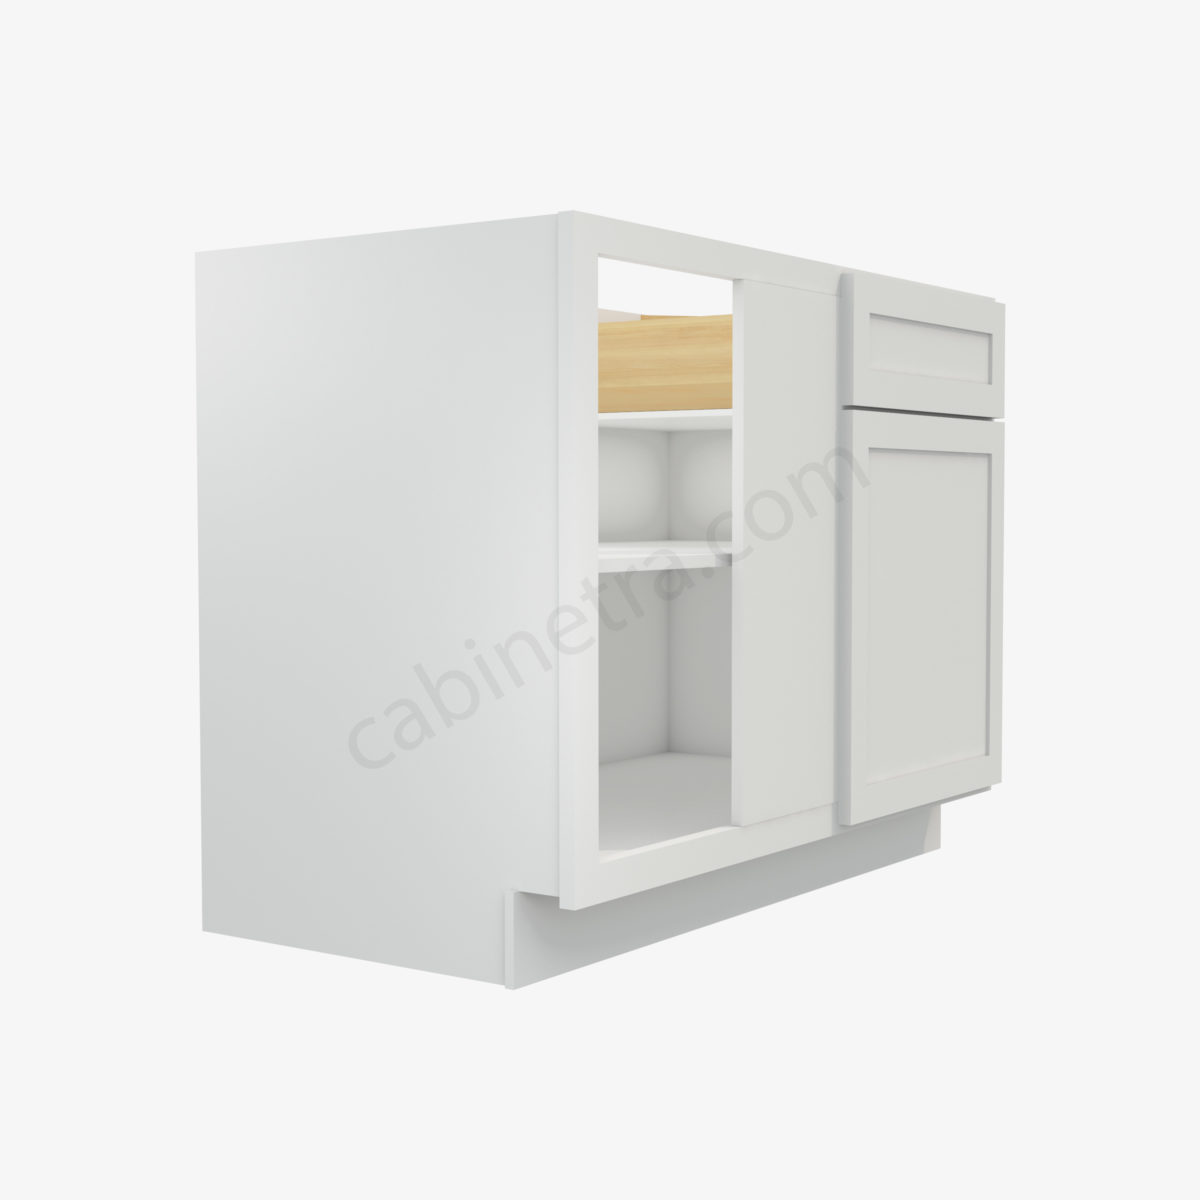 AW BBLC45 48 42W 4 Forevermark Ice White Shaker Cabinetra scaled